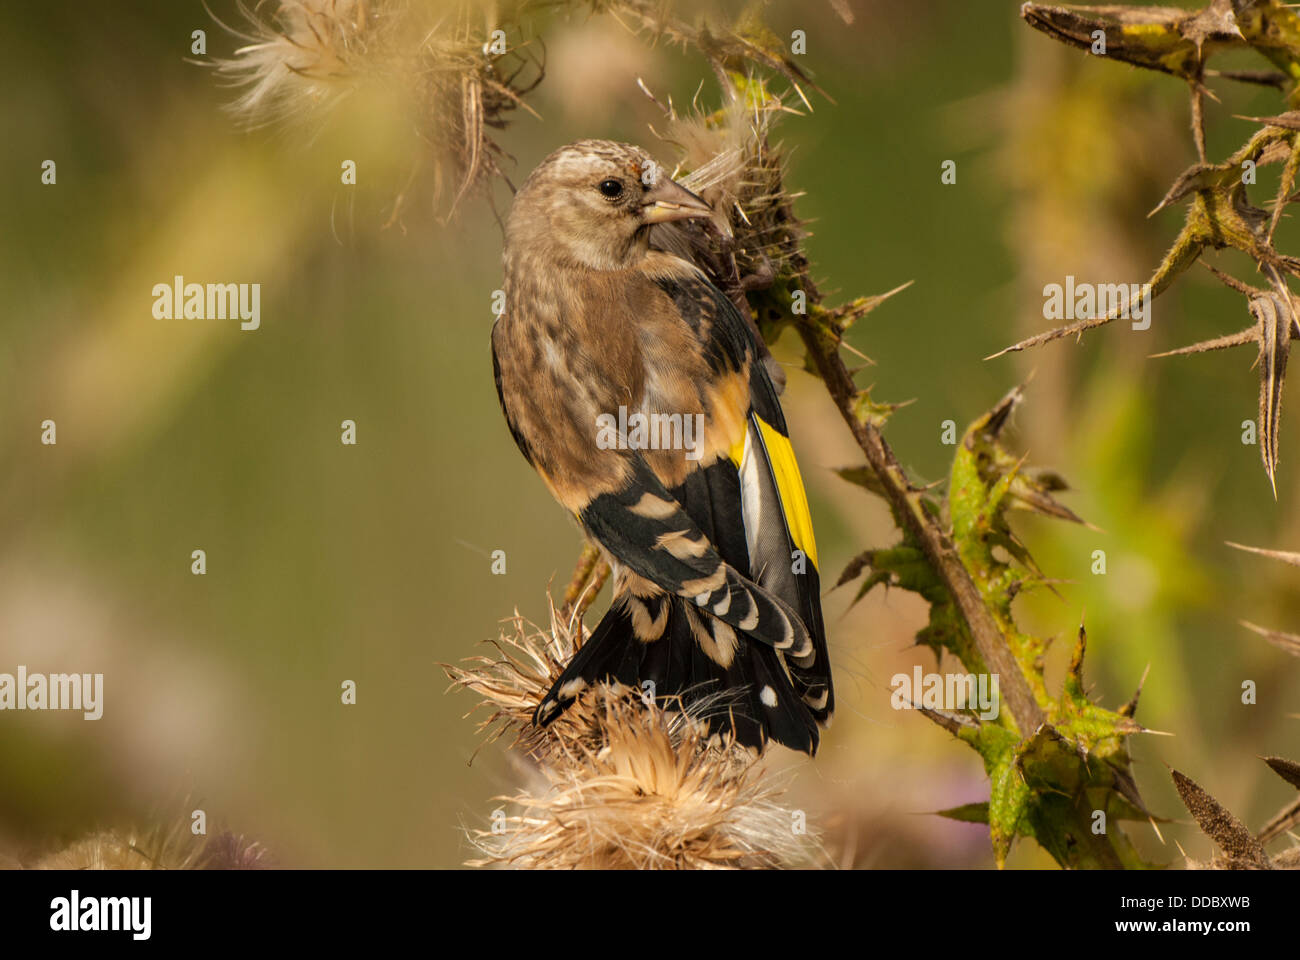 Juvenile Goldfinch on Thistle in close-up. Stock Photo